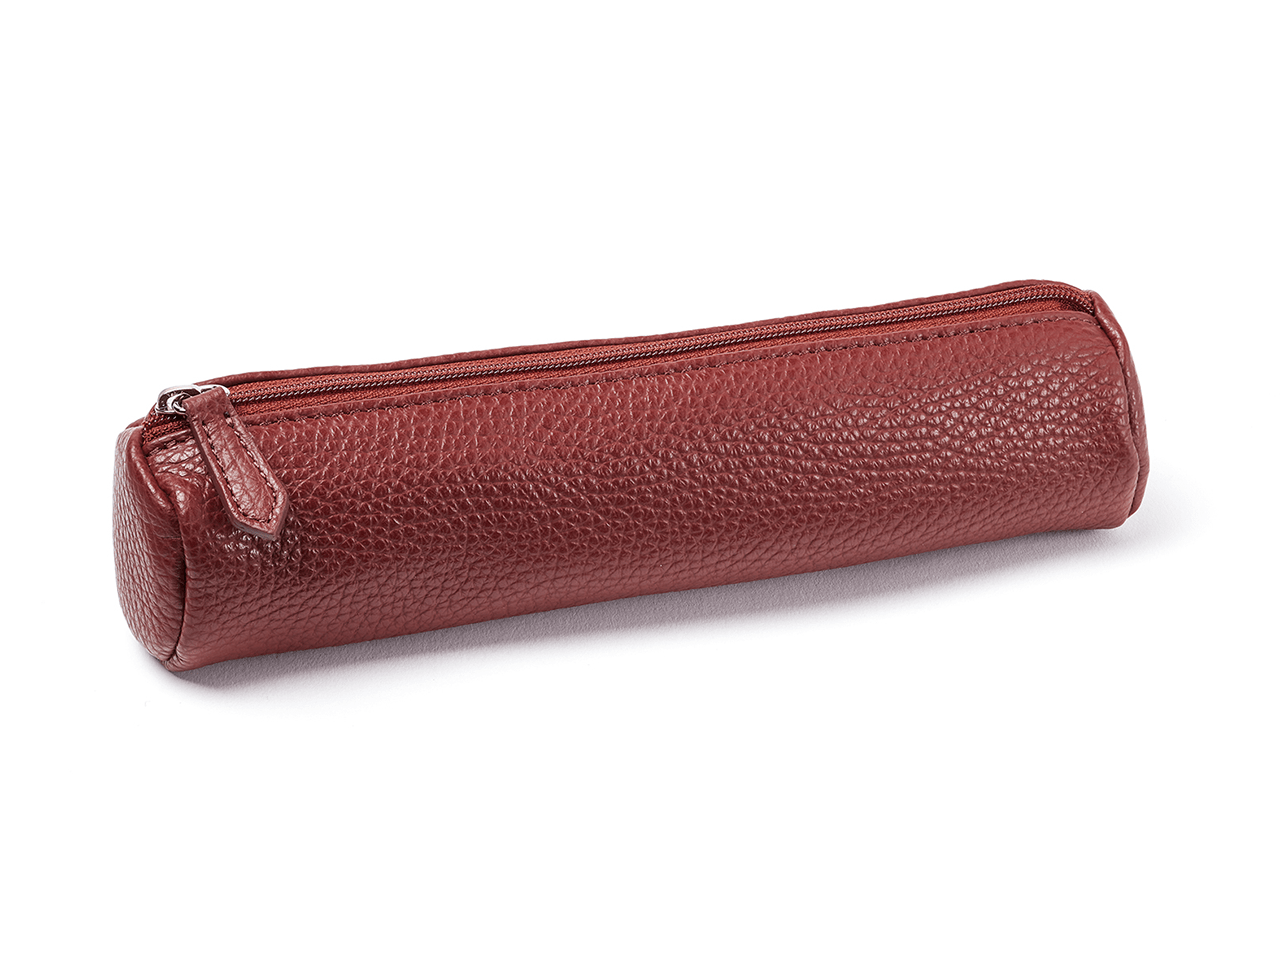 Fabriano Leather Pen Case – Take Note Pens & Stationery